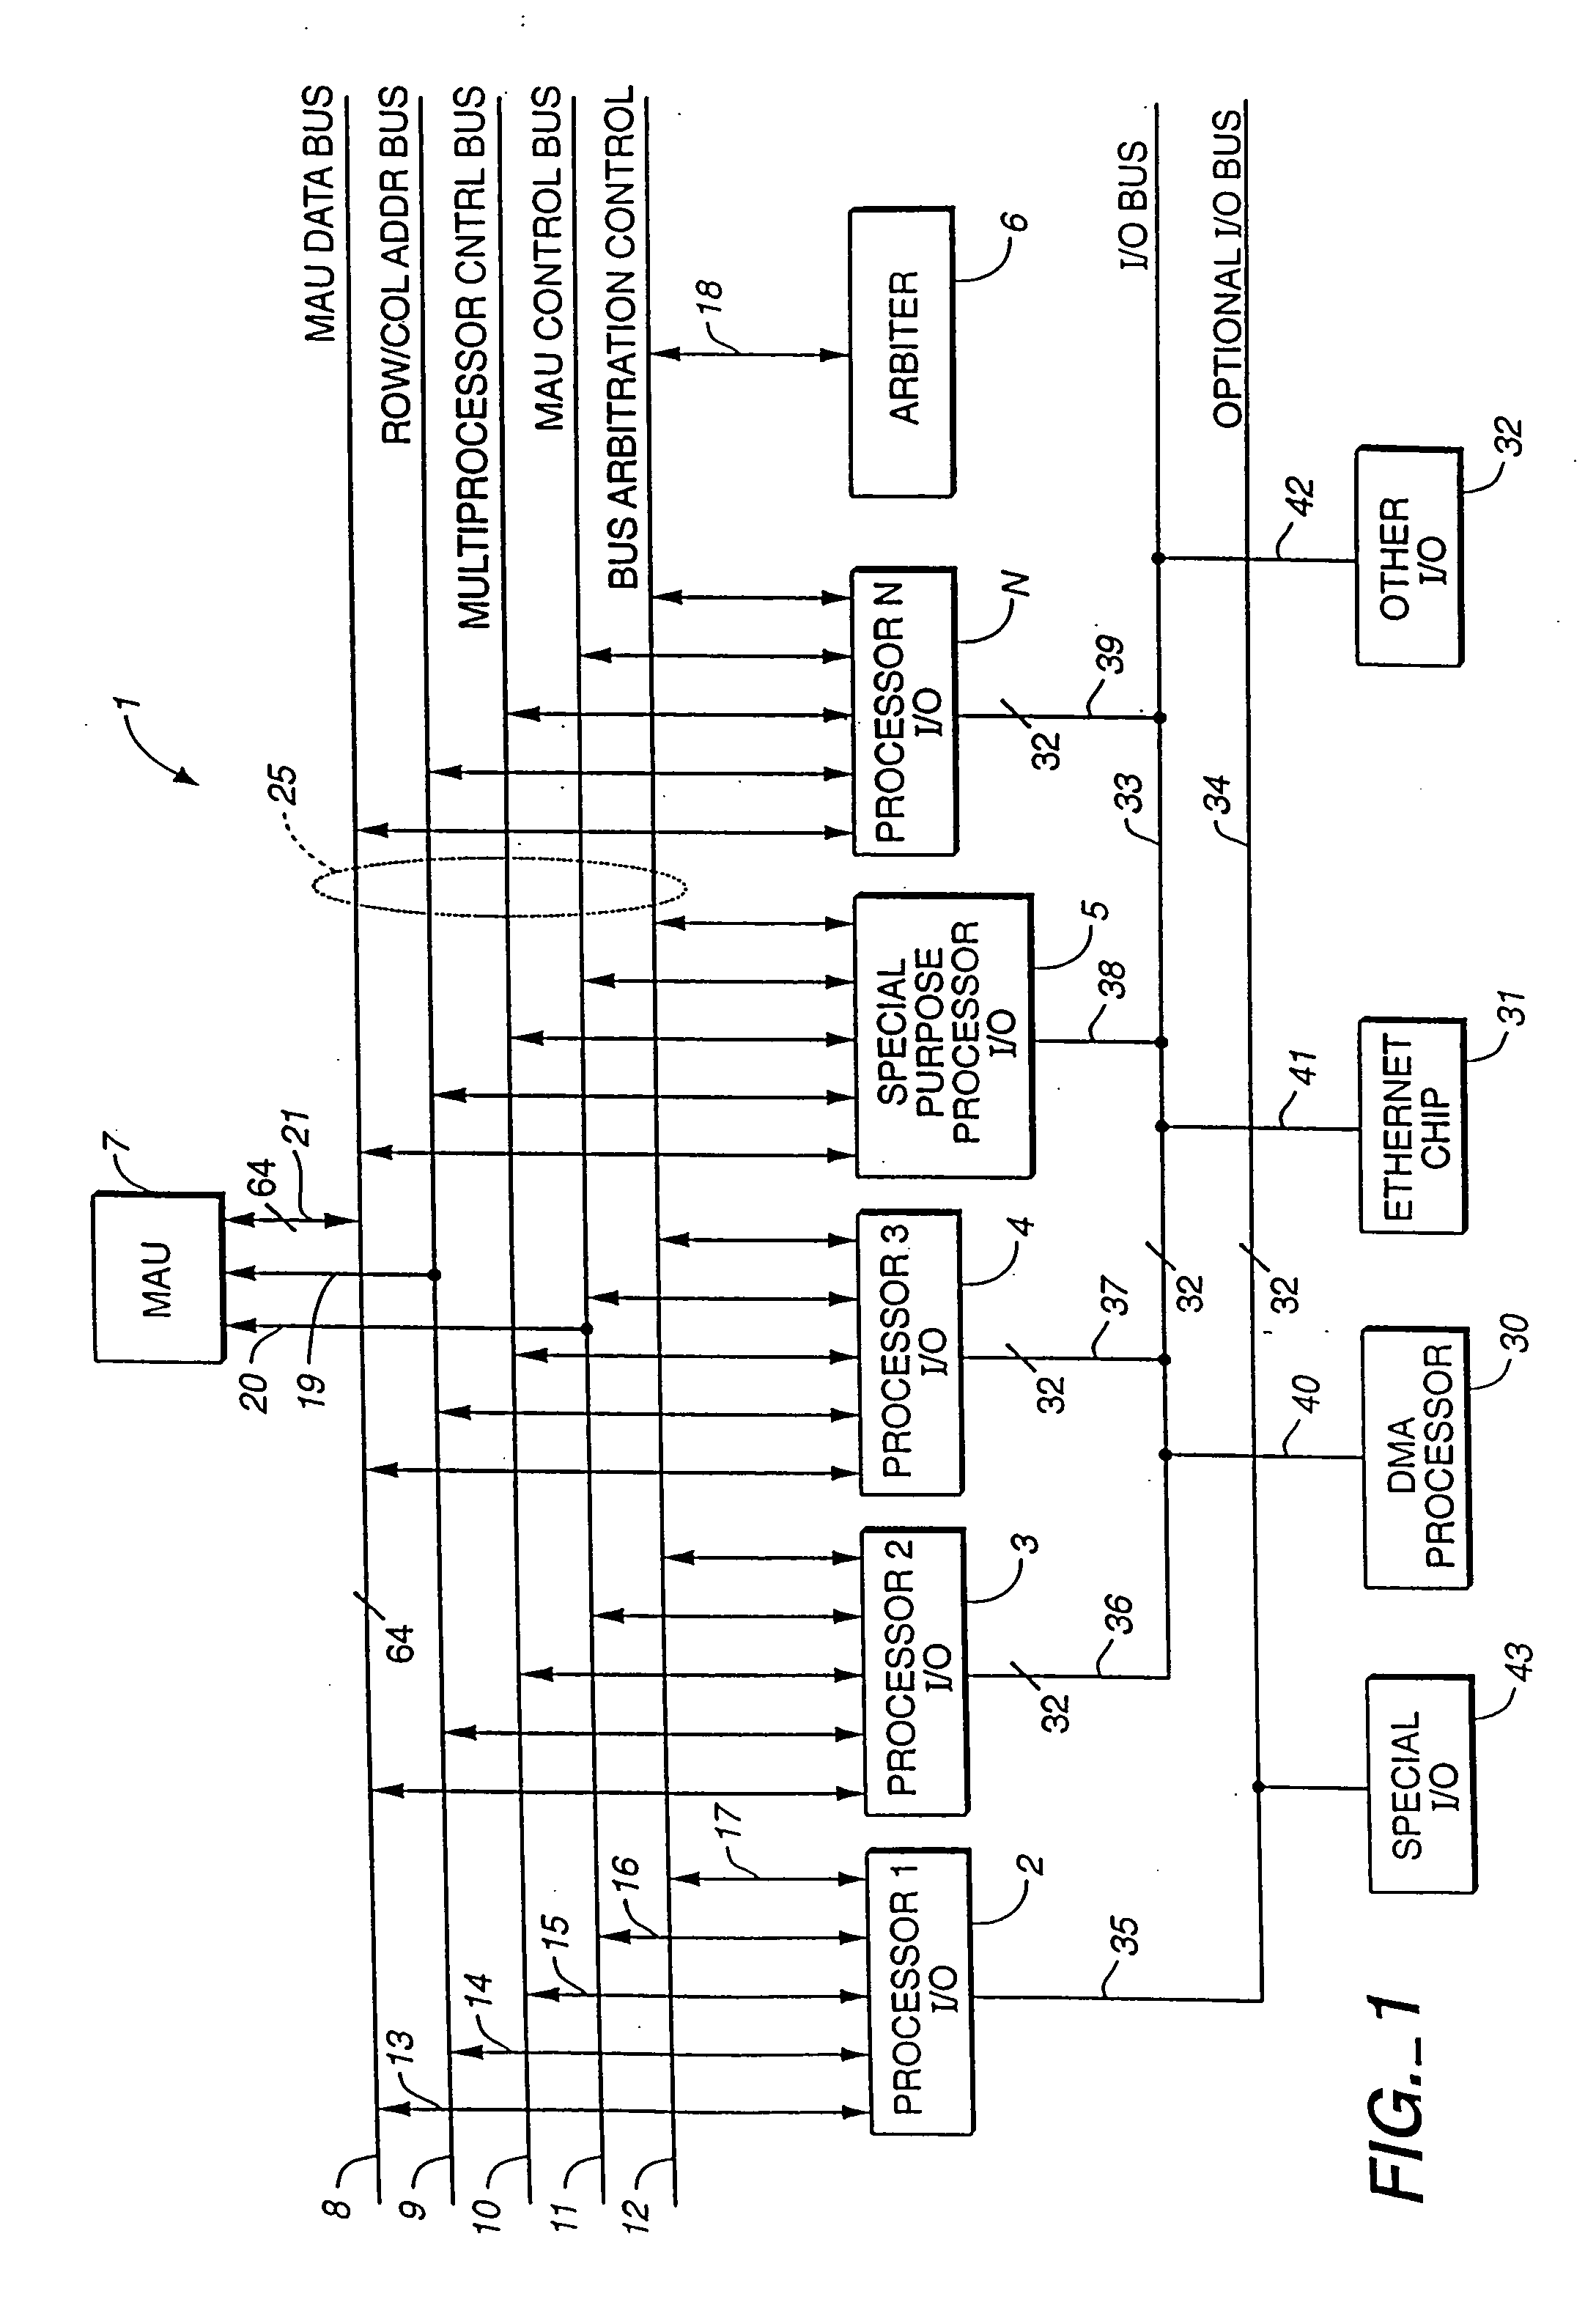 Microprocessor architecture capable of supporting multiple heterogeneous processors